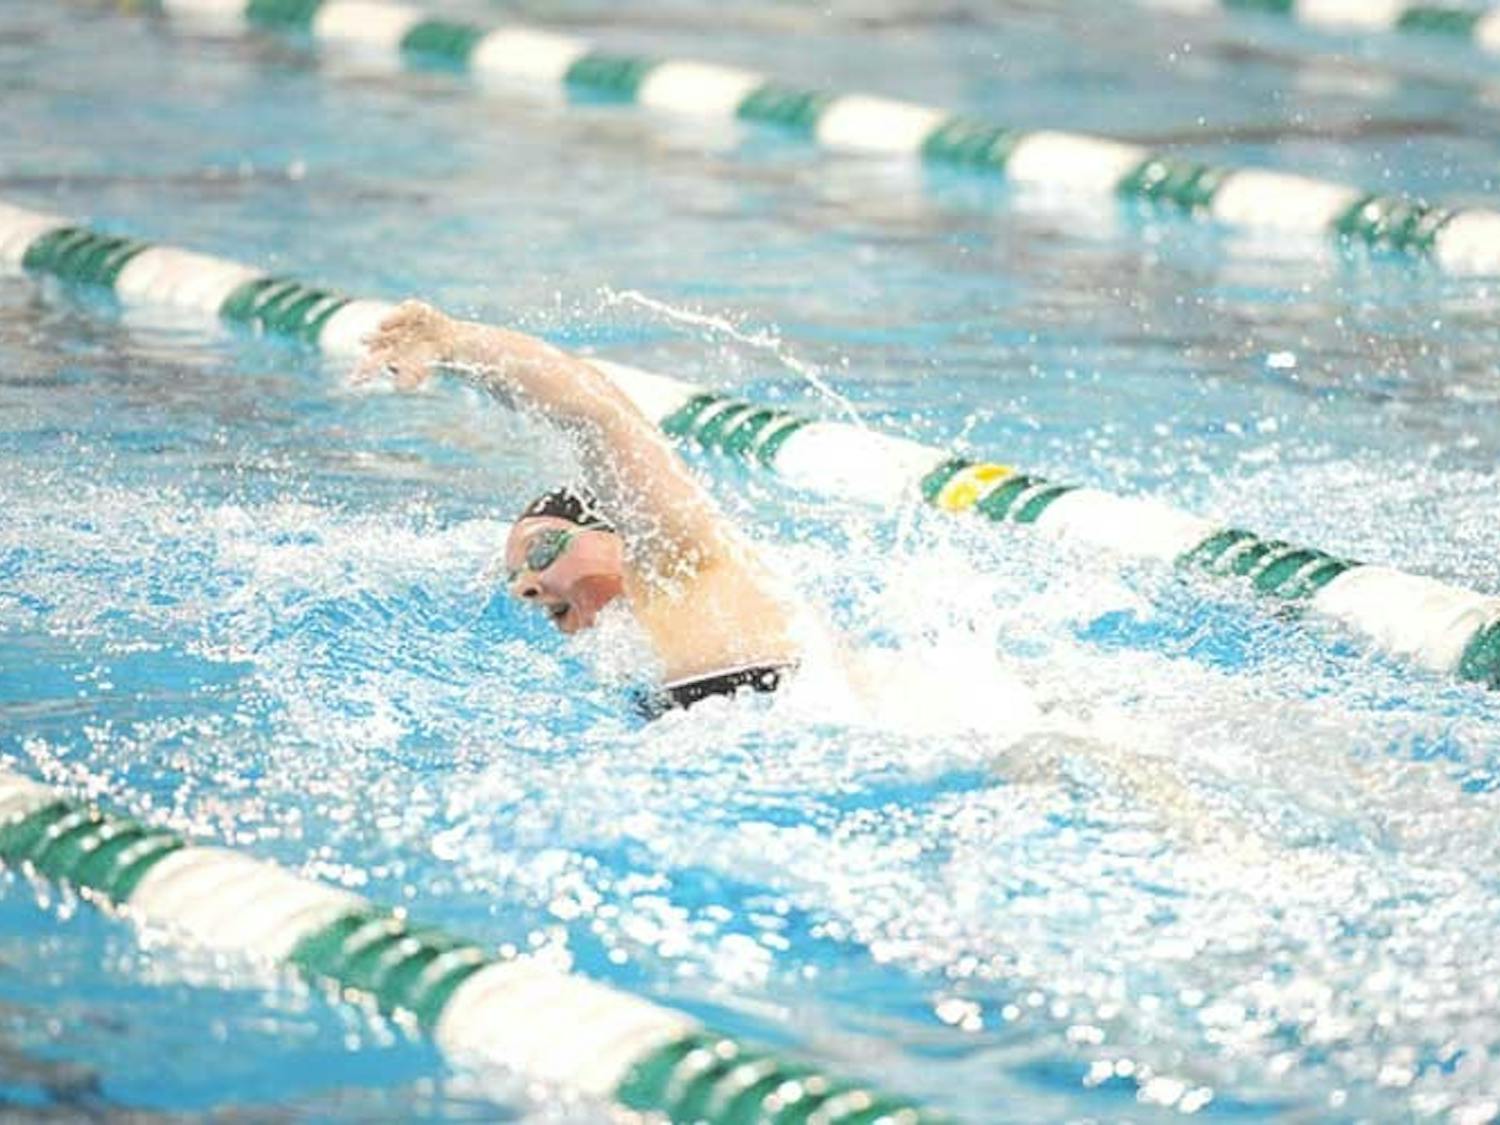 Swimming & Diving: Ohio's Williams falters at NCAA Championships  